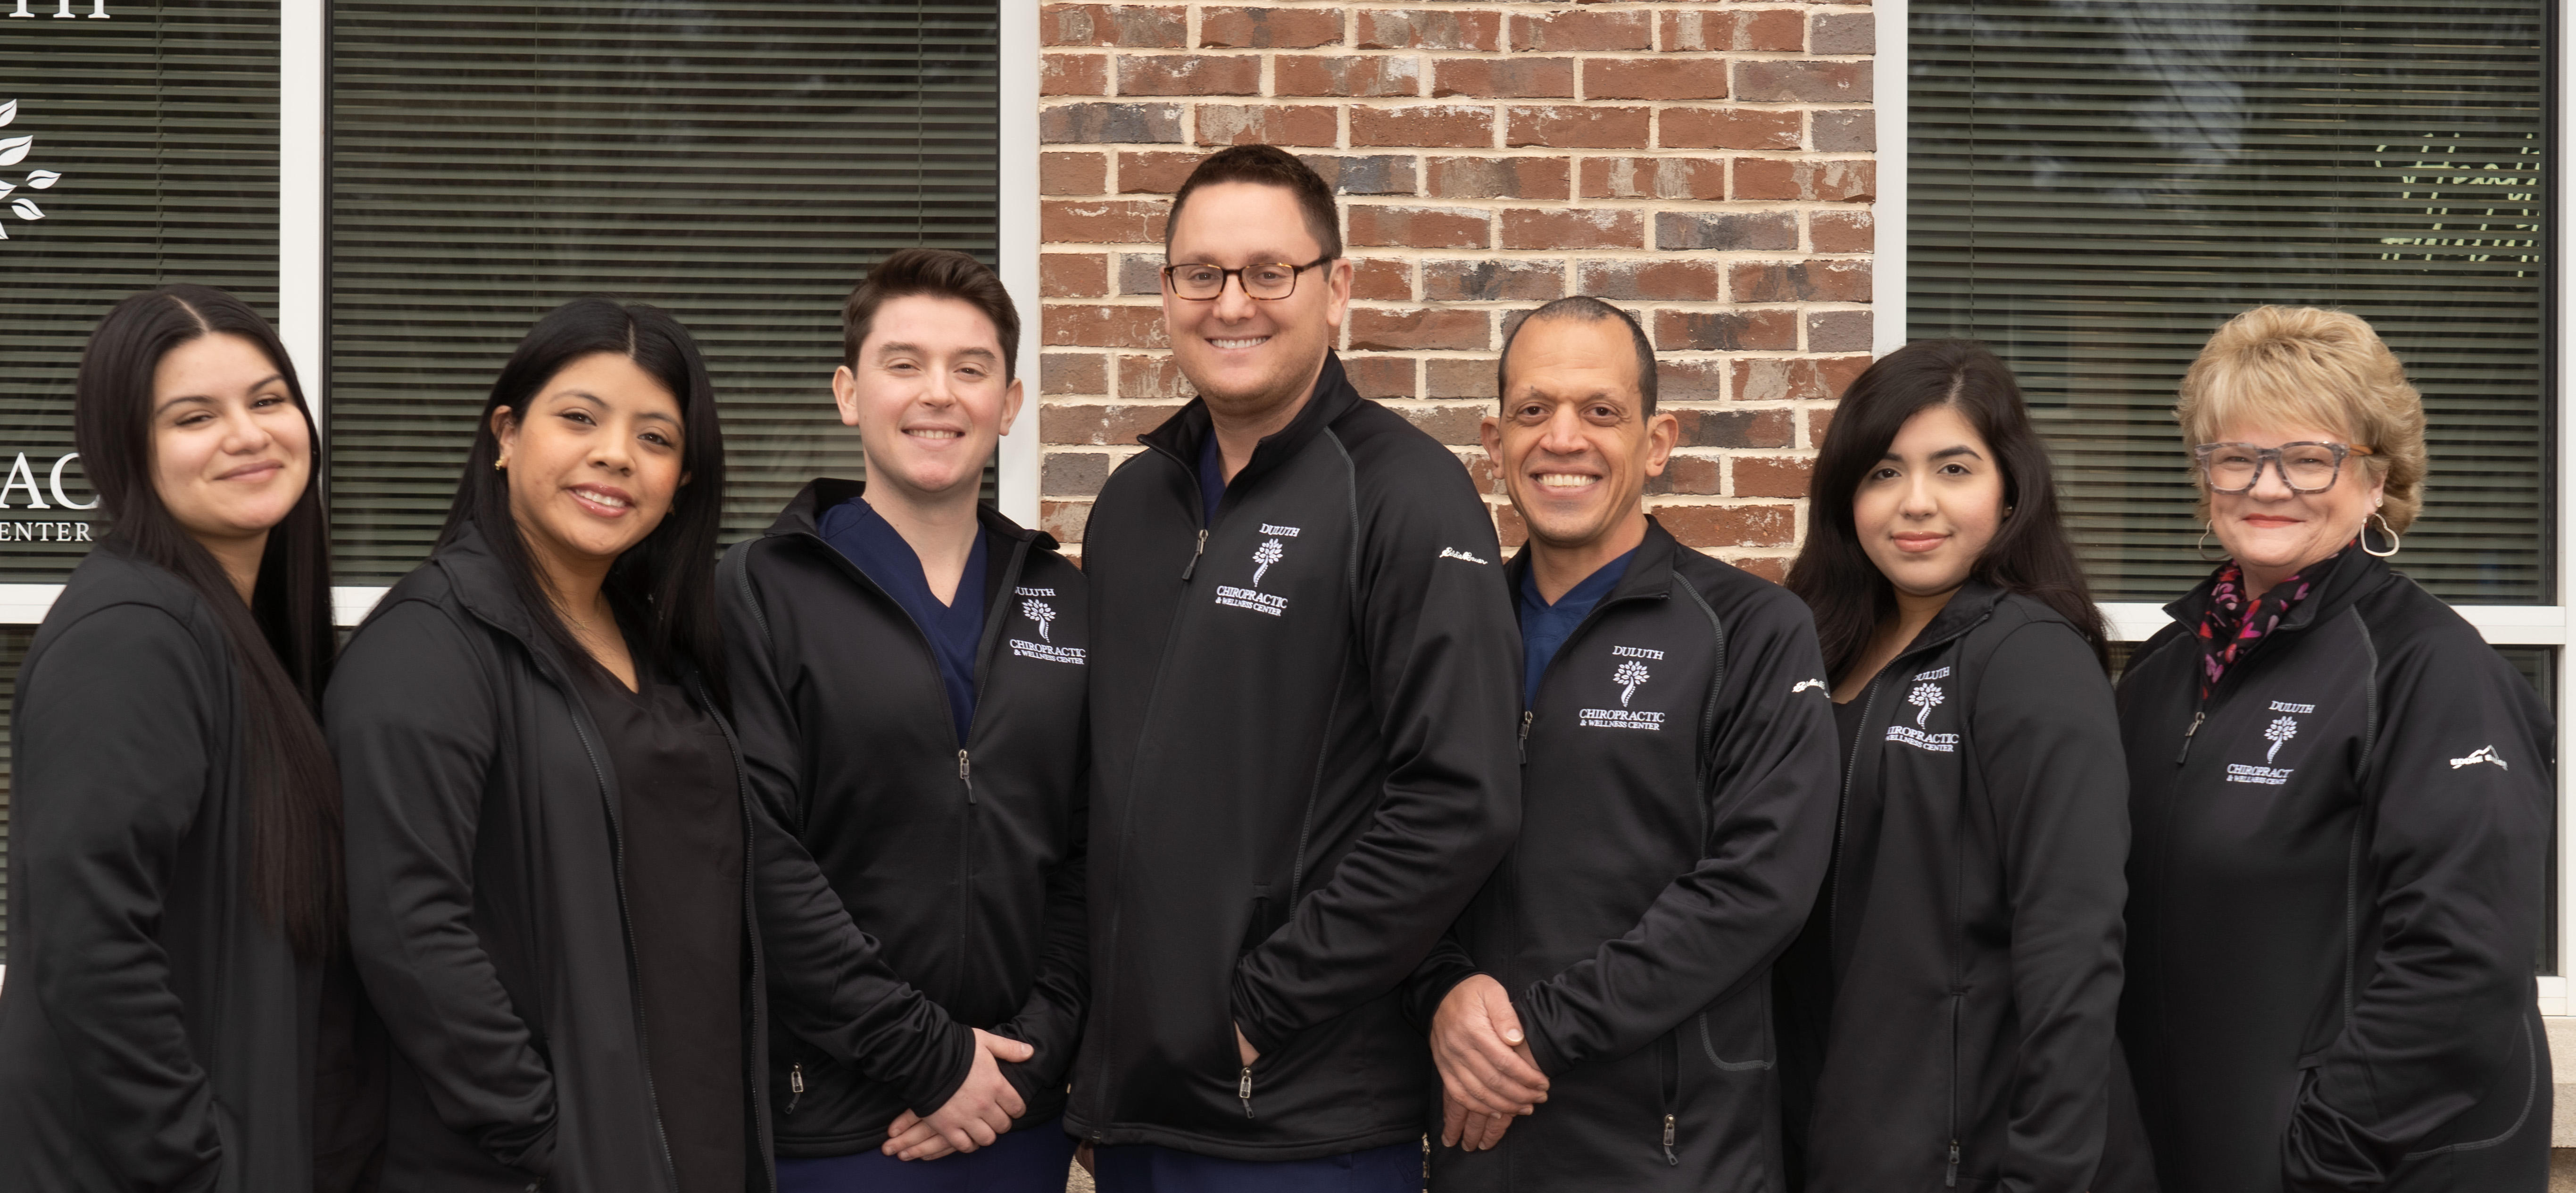 The team at Duluth Chiropractic and Wellness Center